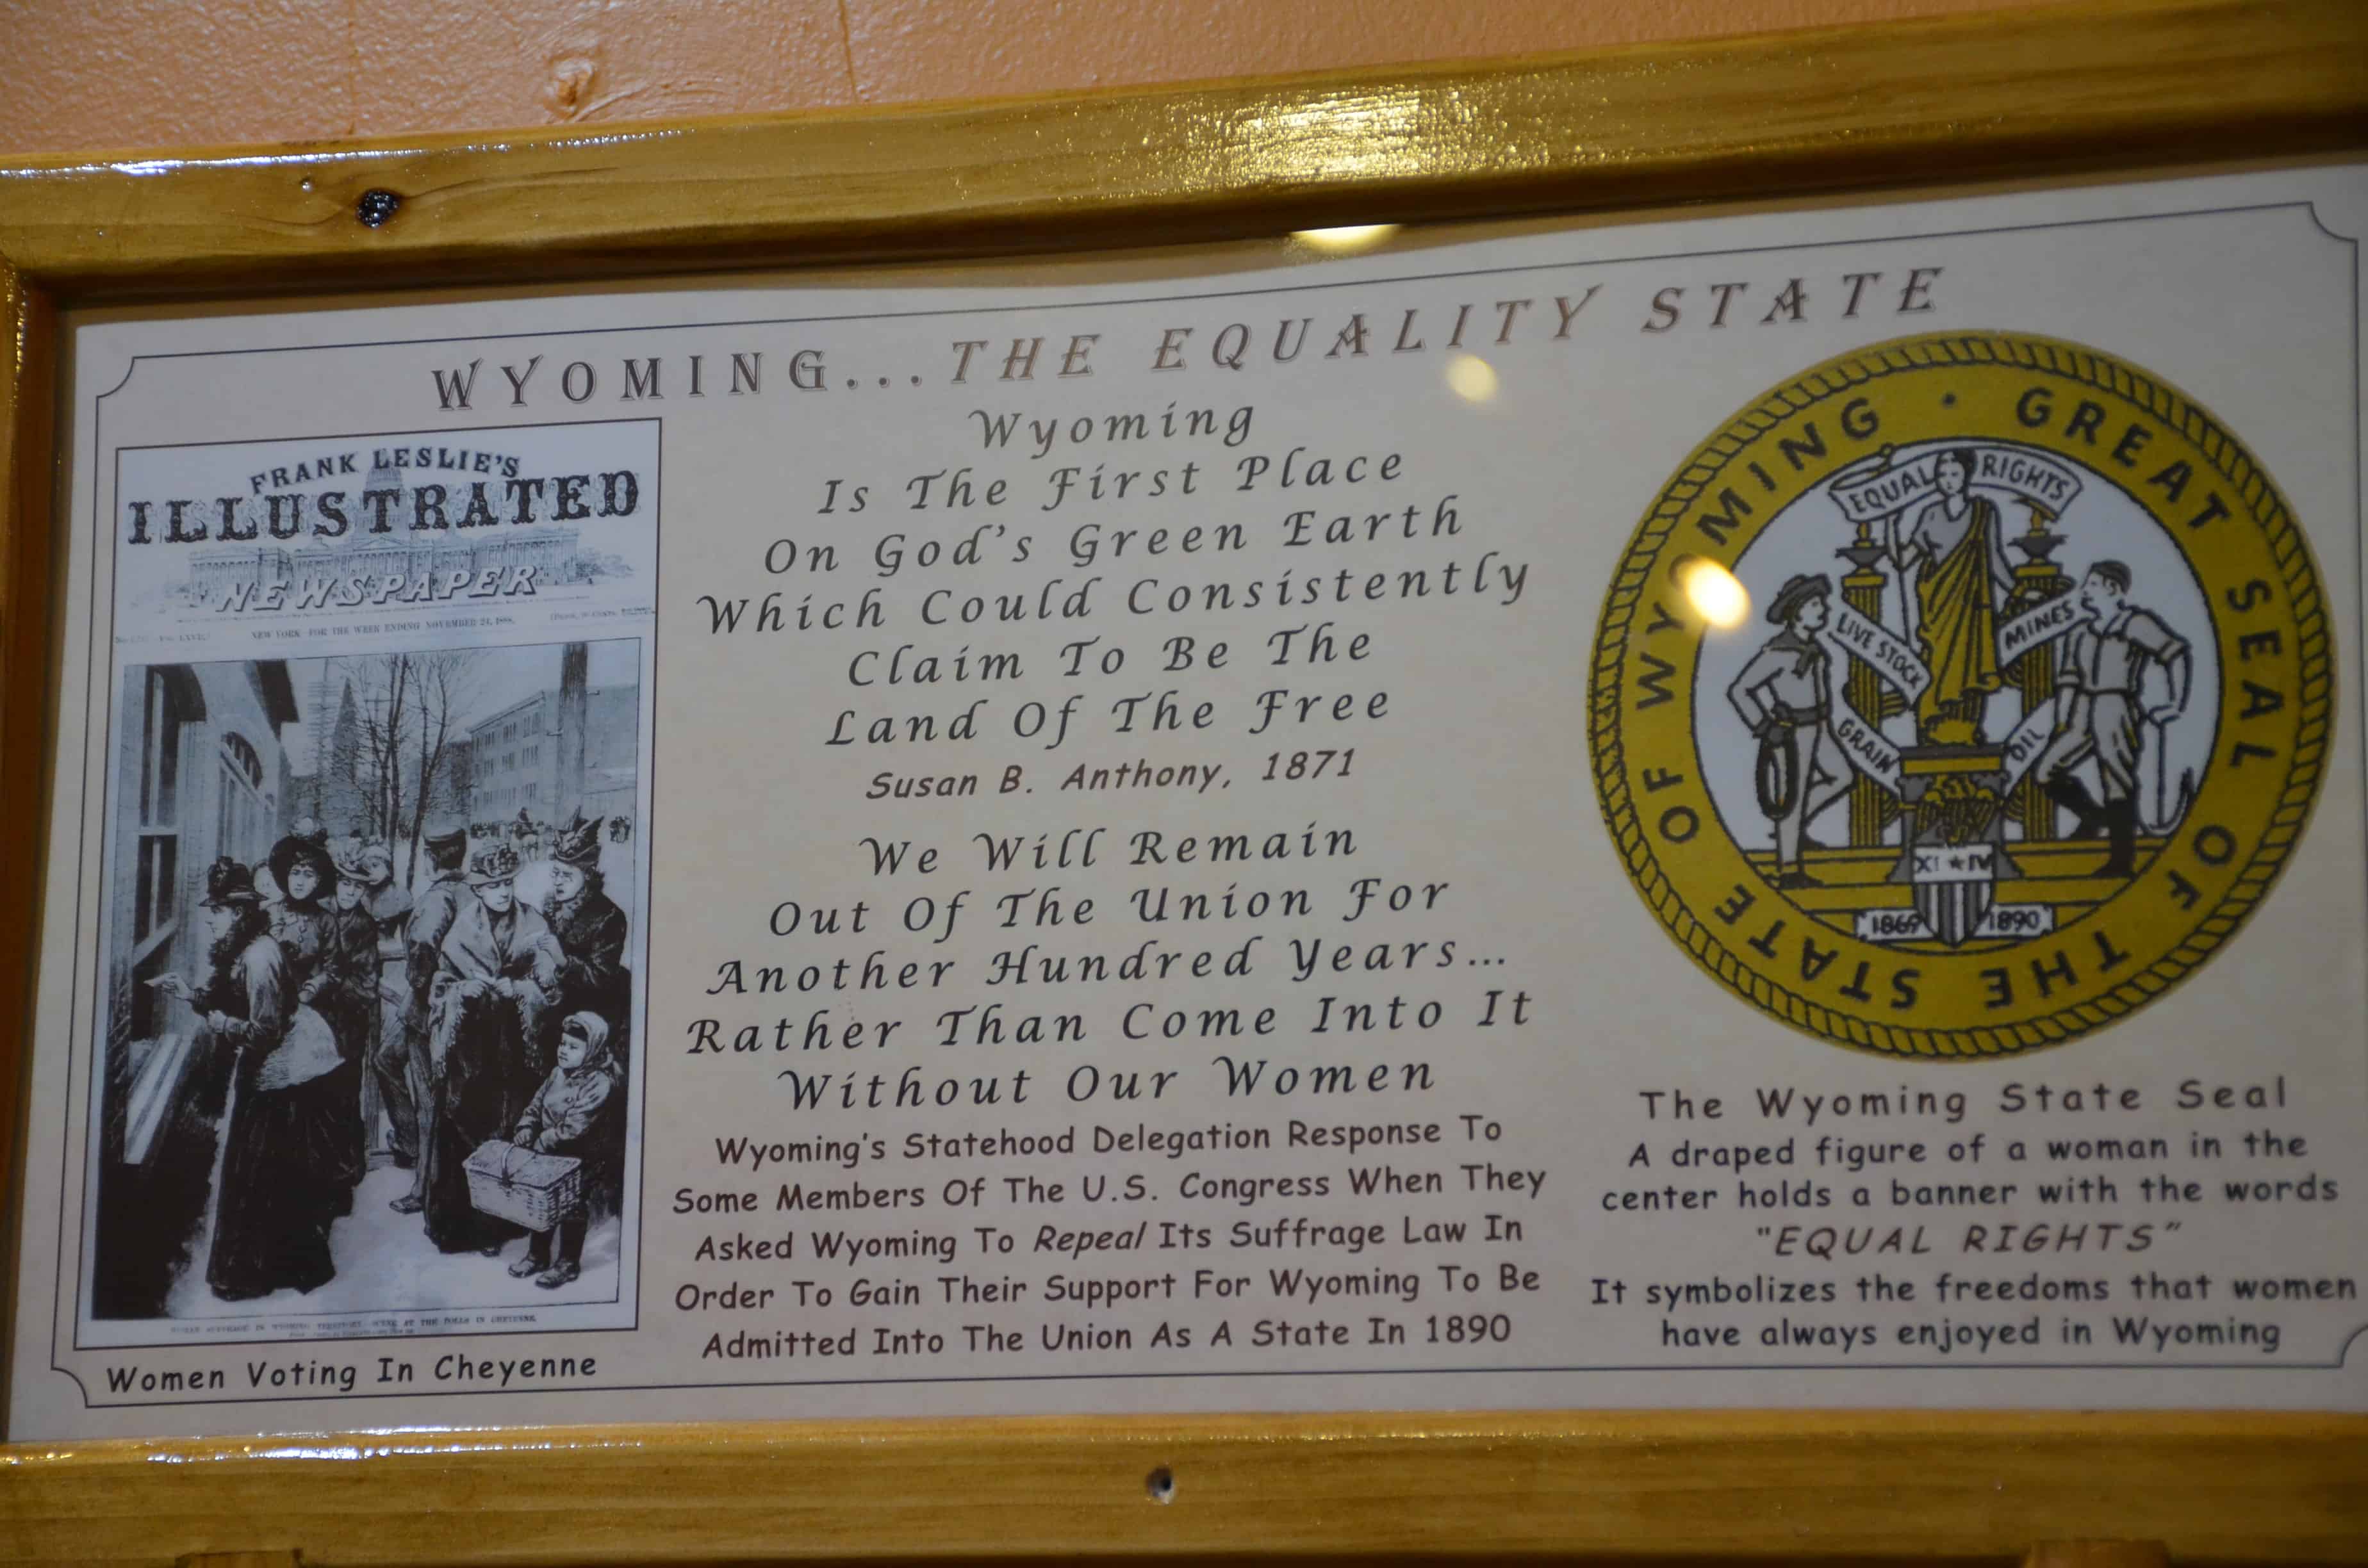 Women's suffrage at the Cowgirls of the West Museum in Cheyenne, Wyoming